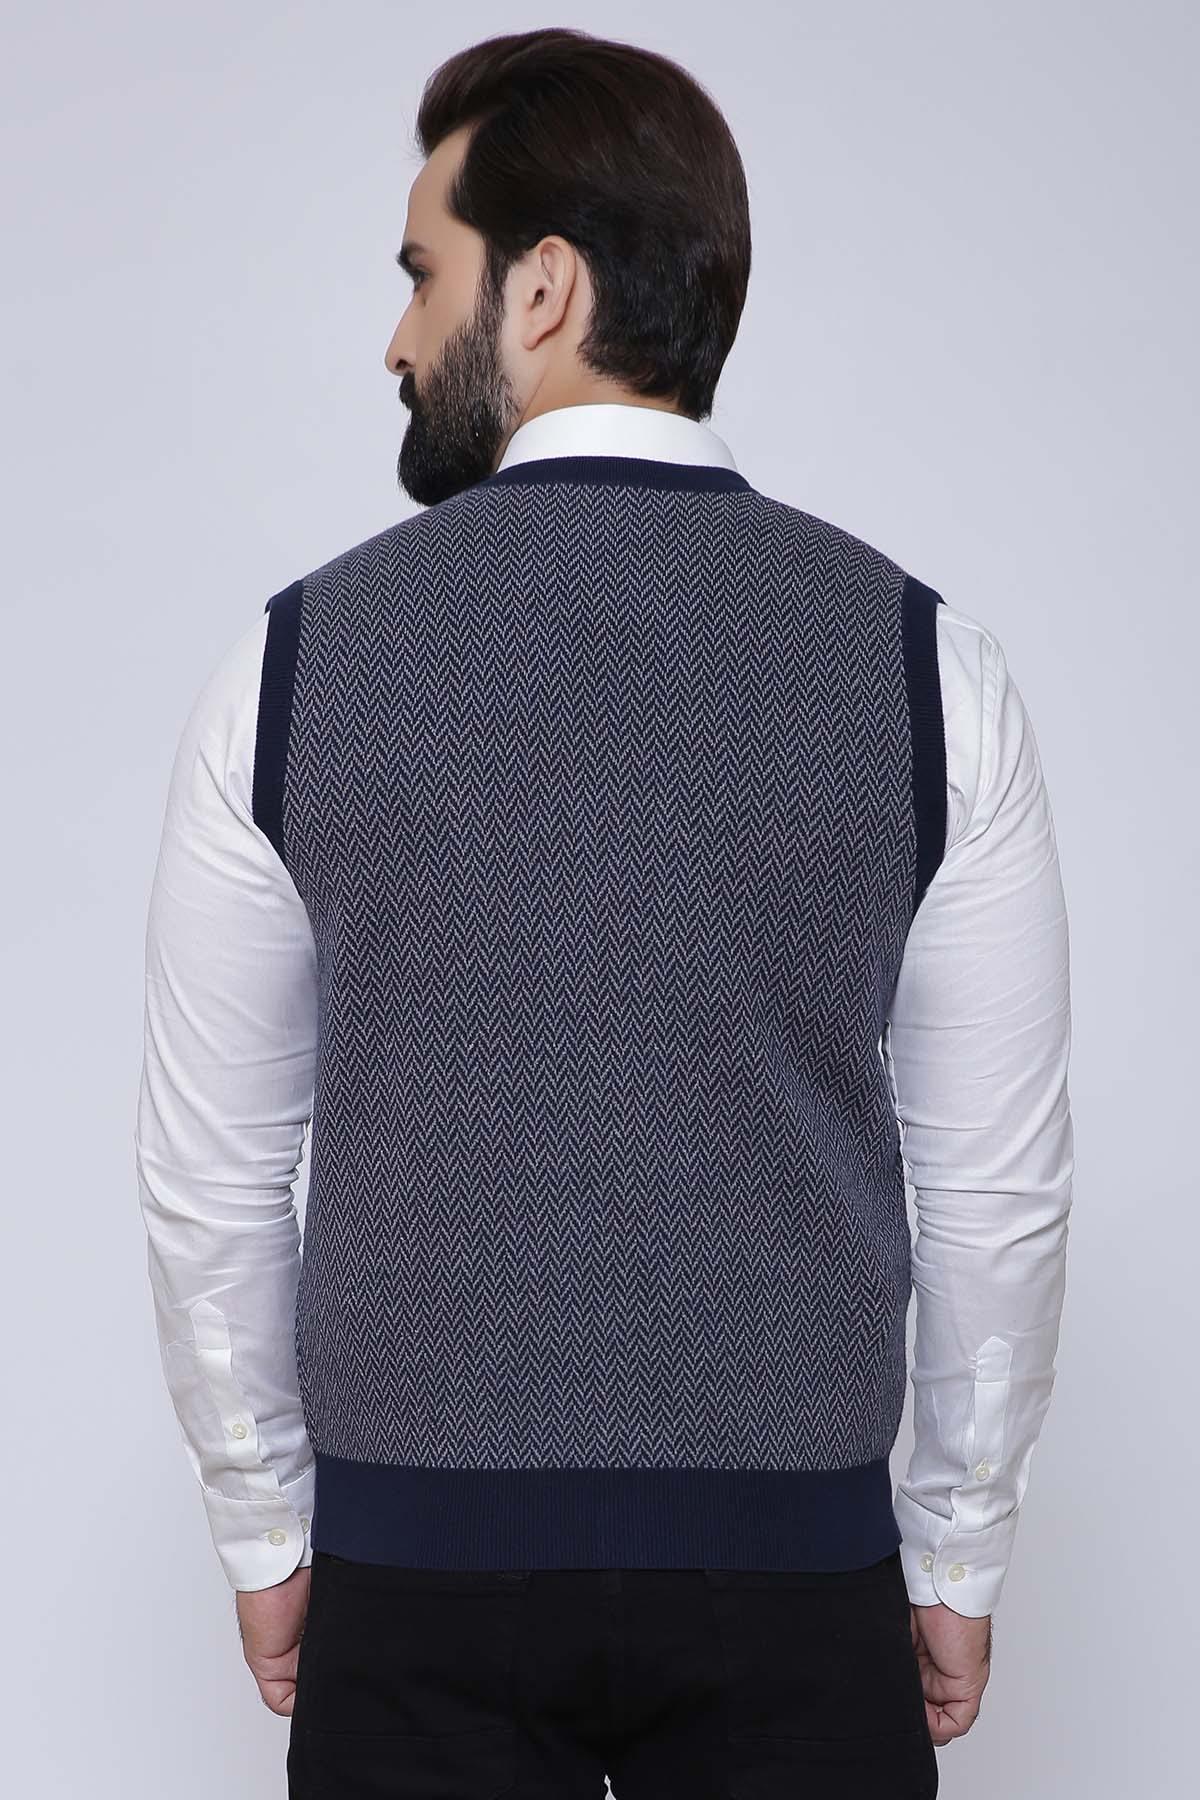 SWEATER CARDIGAN SLEEVE LESS NAVY GREY at Charcoal Clothing